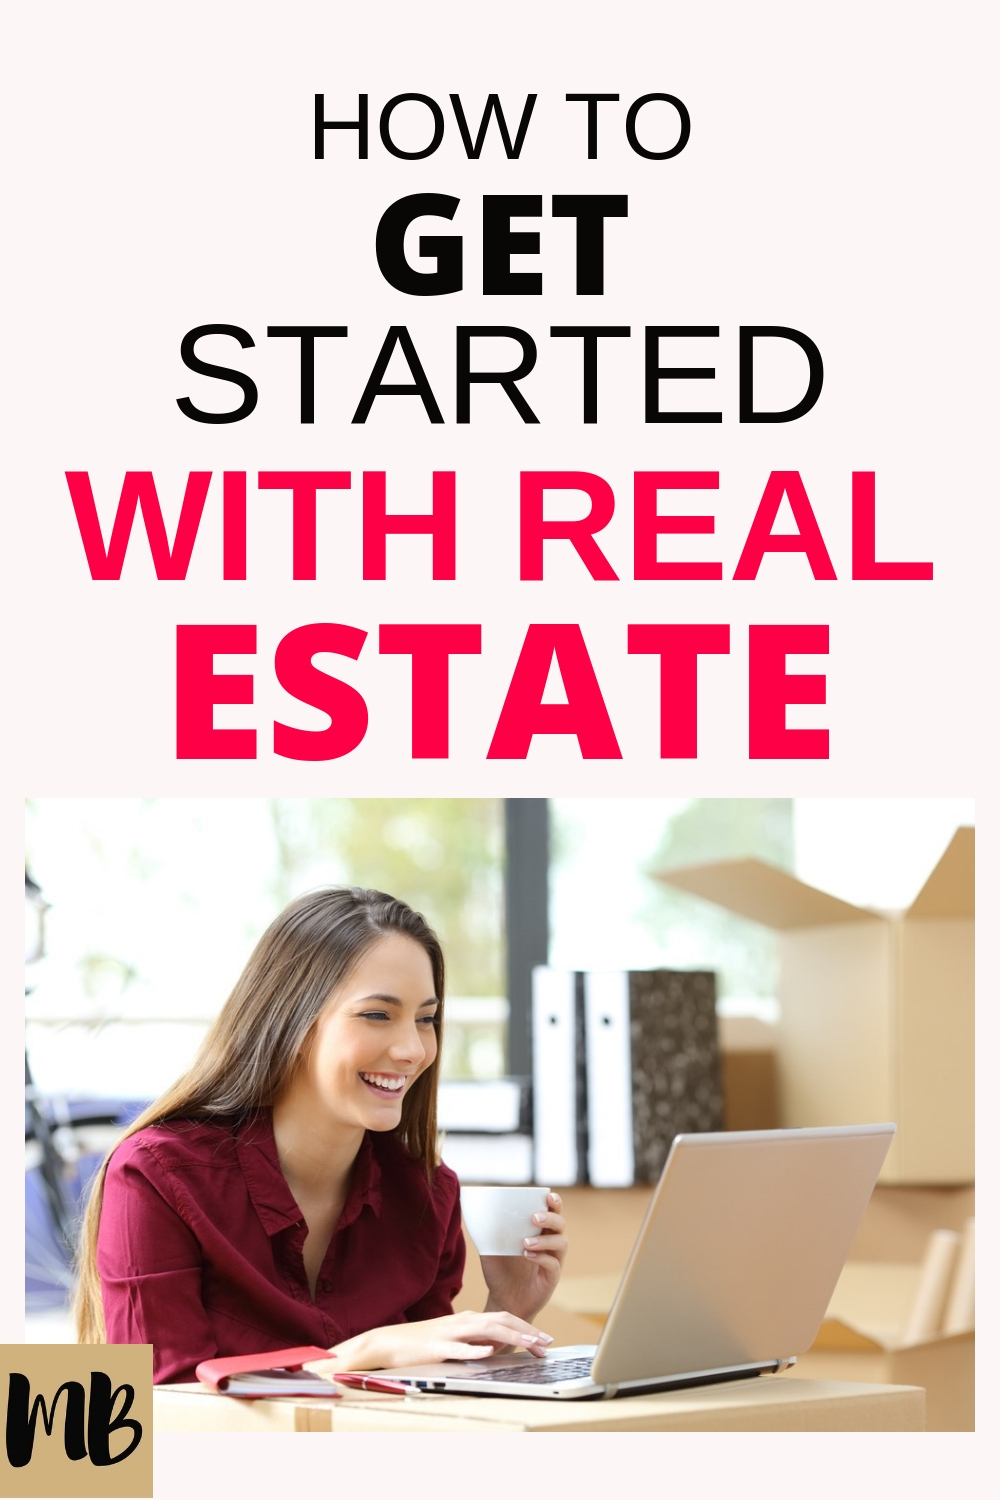 The real estate investing course that will teach you how to get started with real estate investing | Review of Chad Carson's Real Estate Investing Course